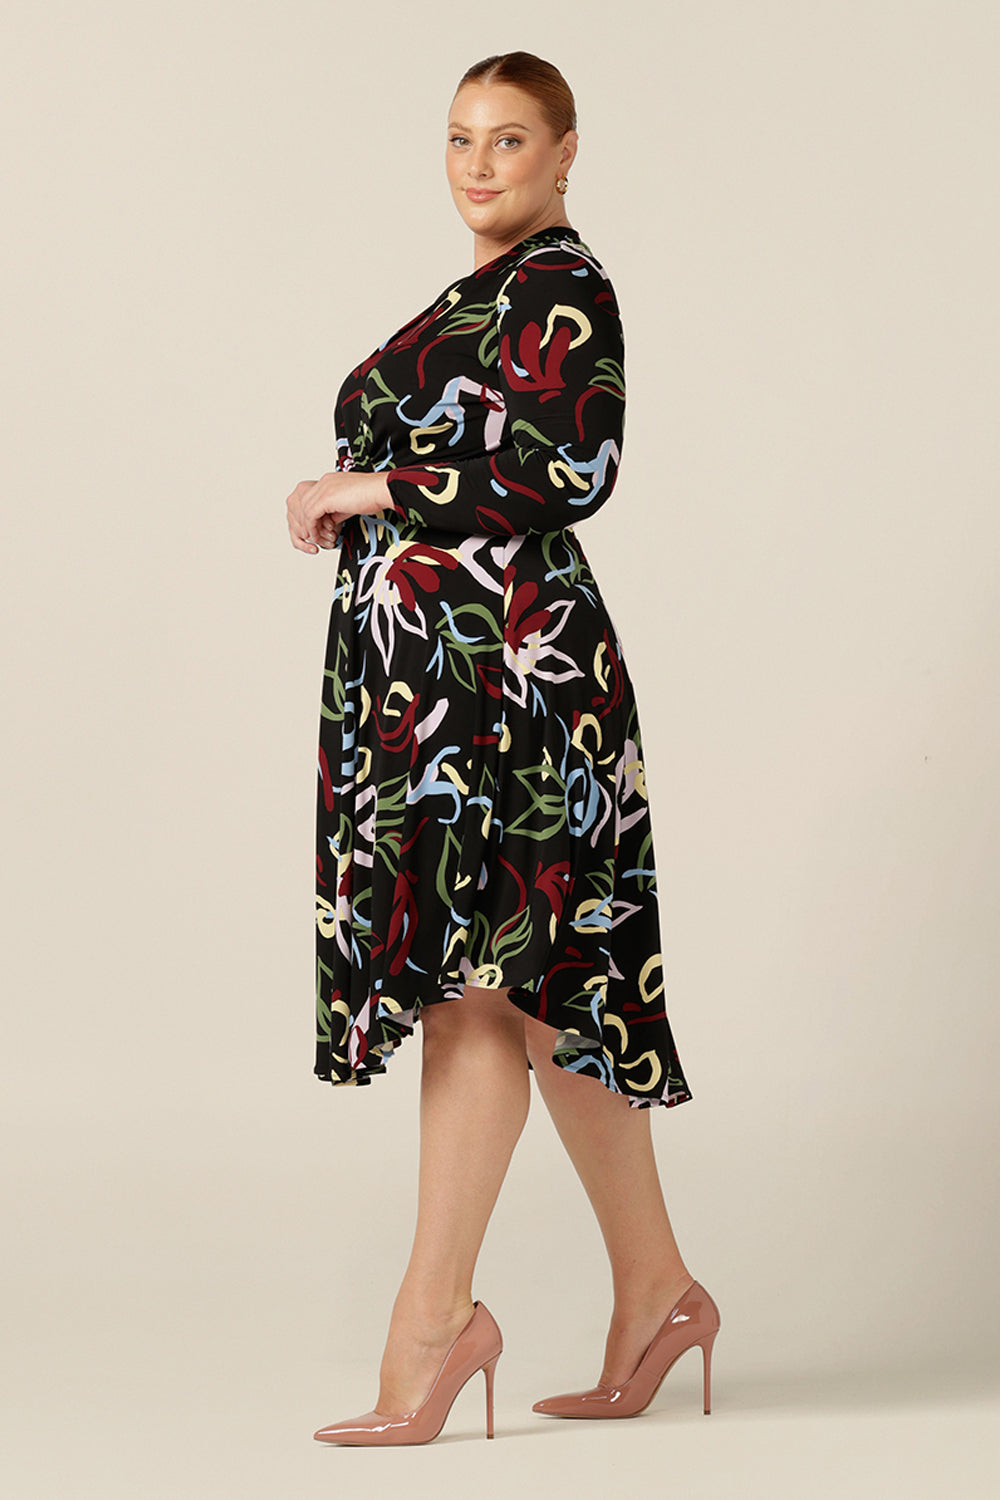 A size 18, curvy woman wears a knee length jersey dress with wrap-over bodice and full length sleeves, made in Australia by women's clothing brand, L&F.